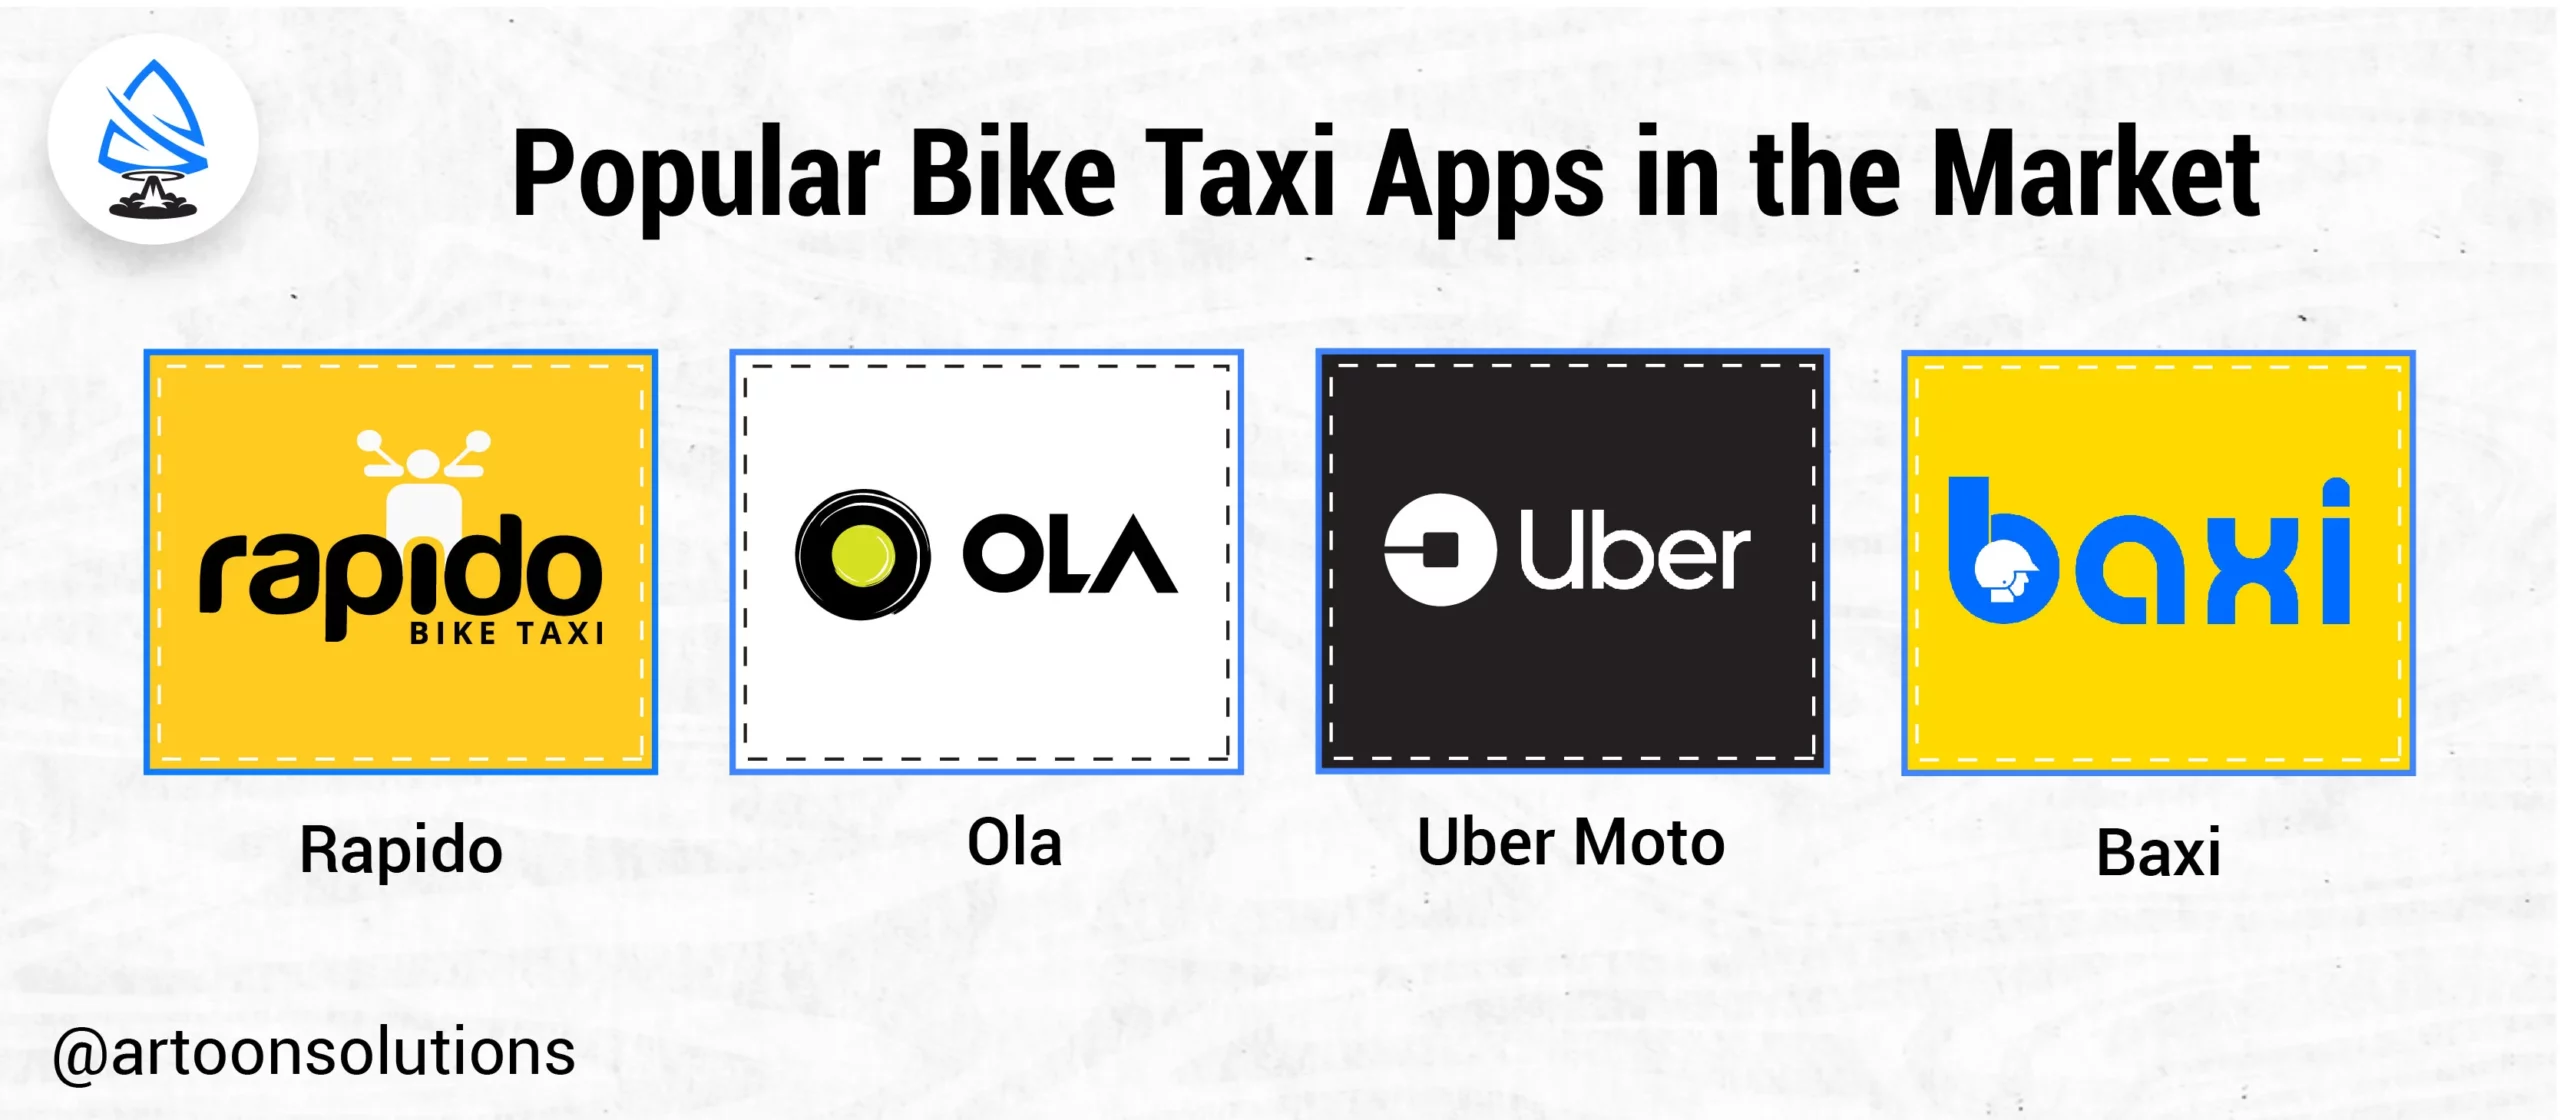 Popular Bike Taxi Apps in the Market